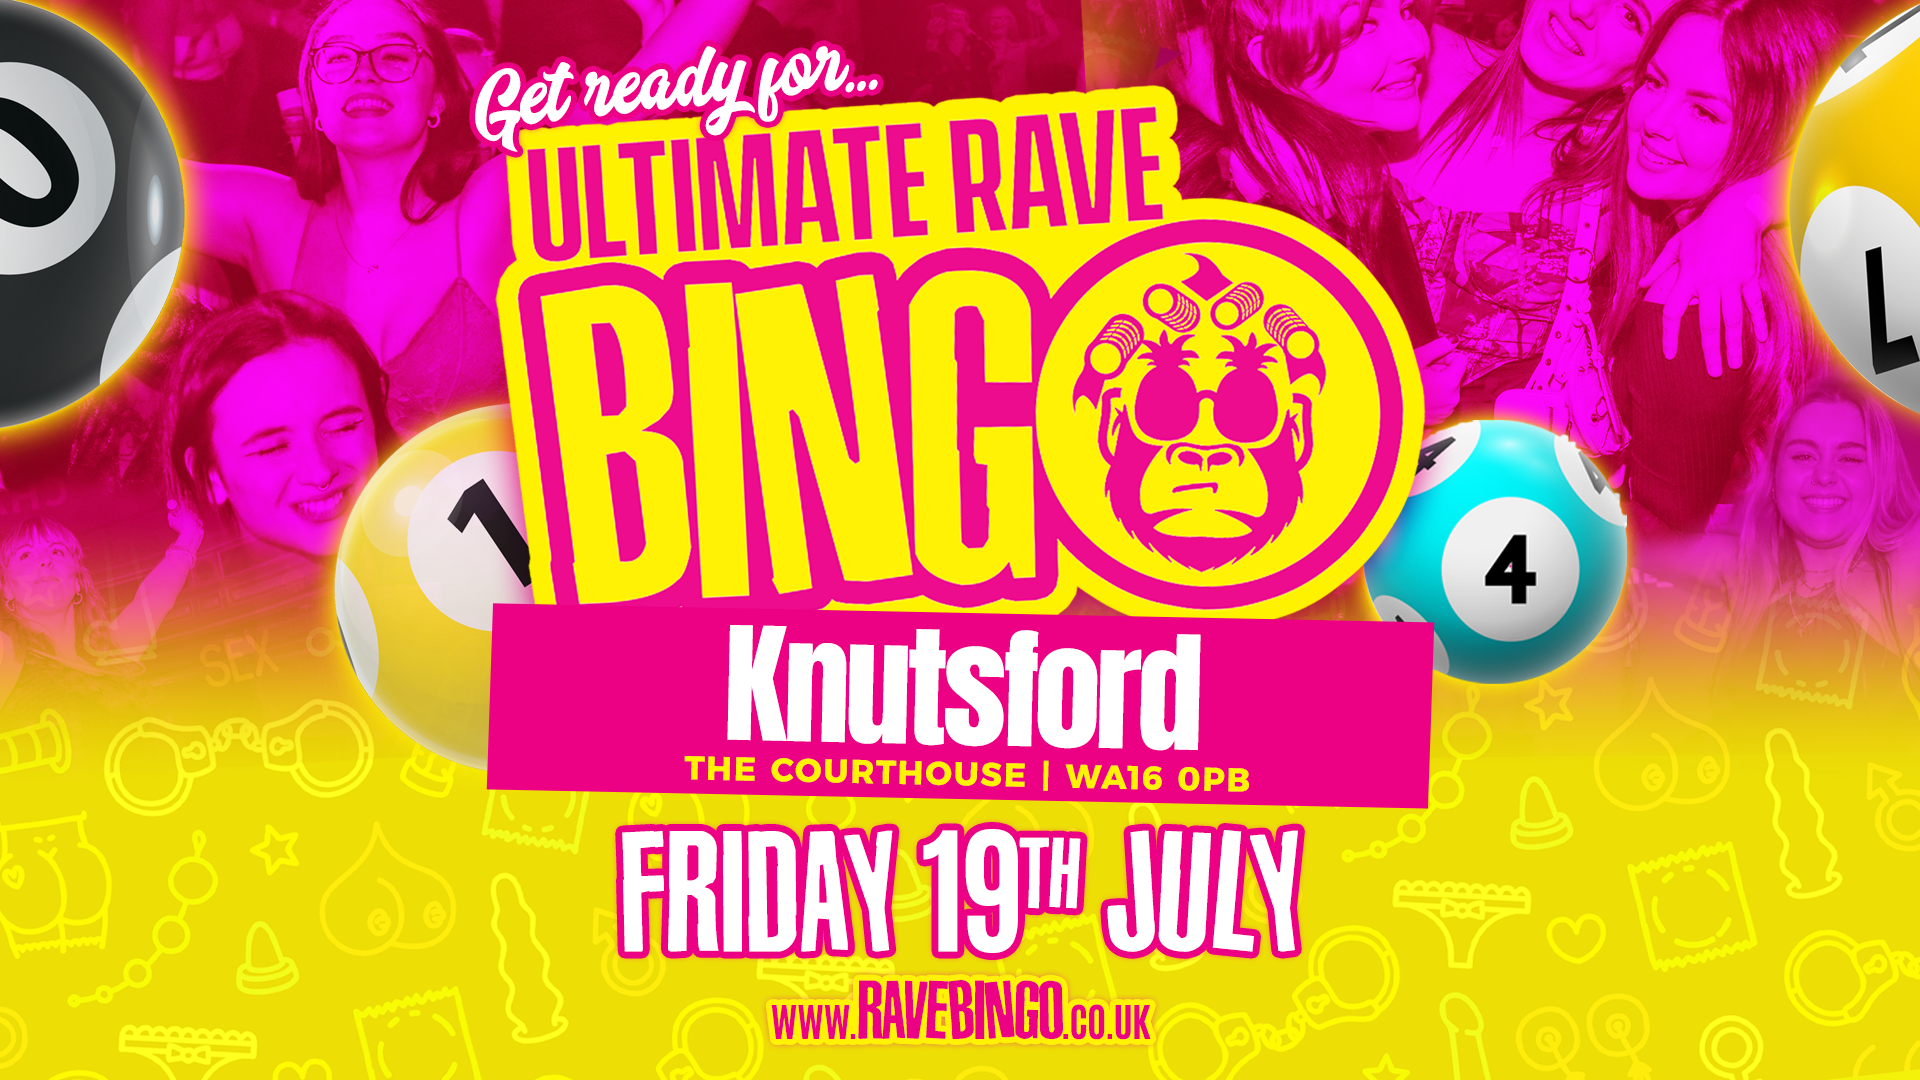 Ultimate Rave Bingo // Knutsford // Friday 19th July